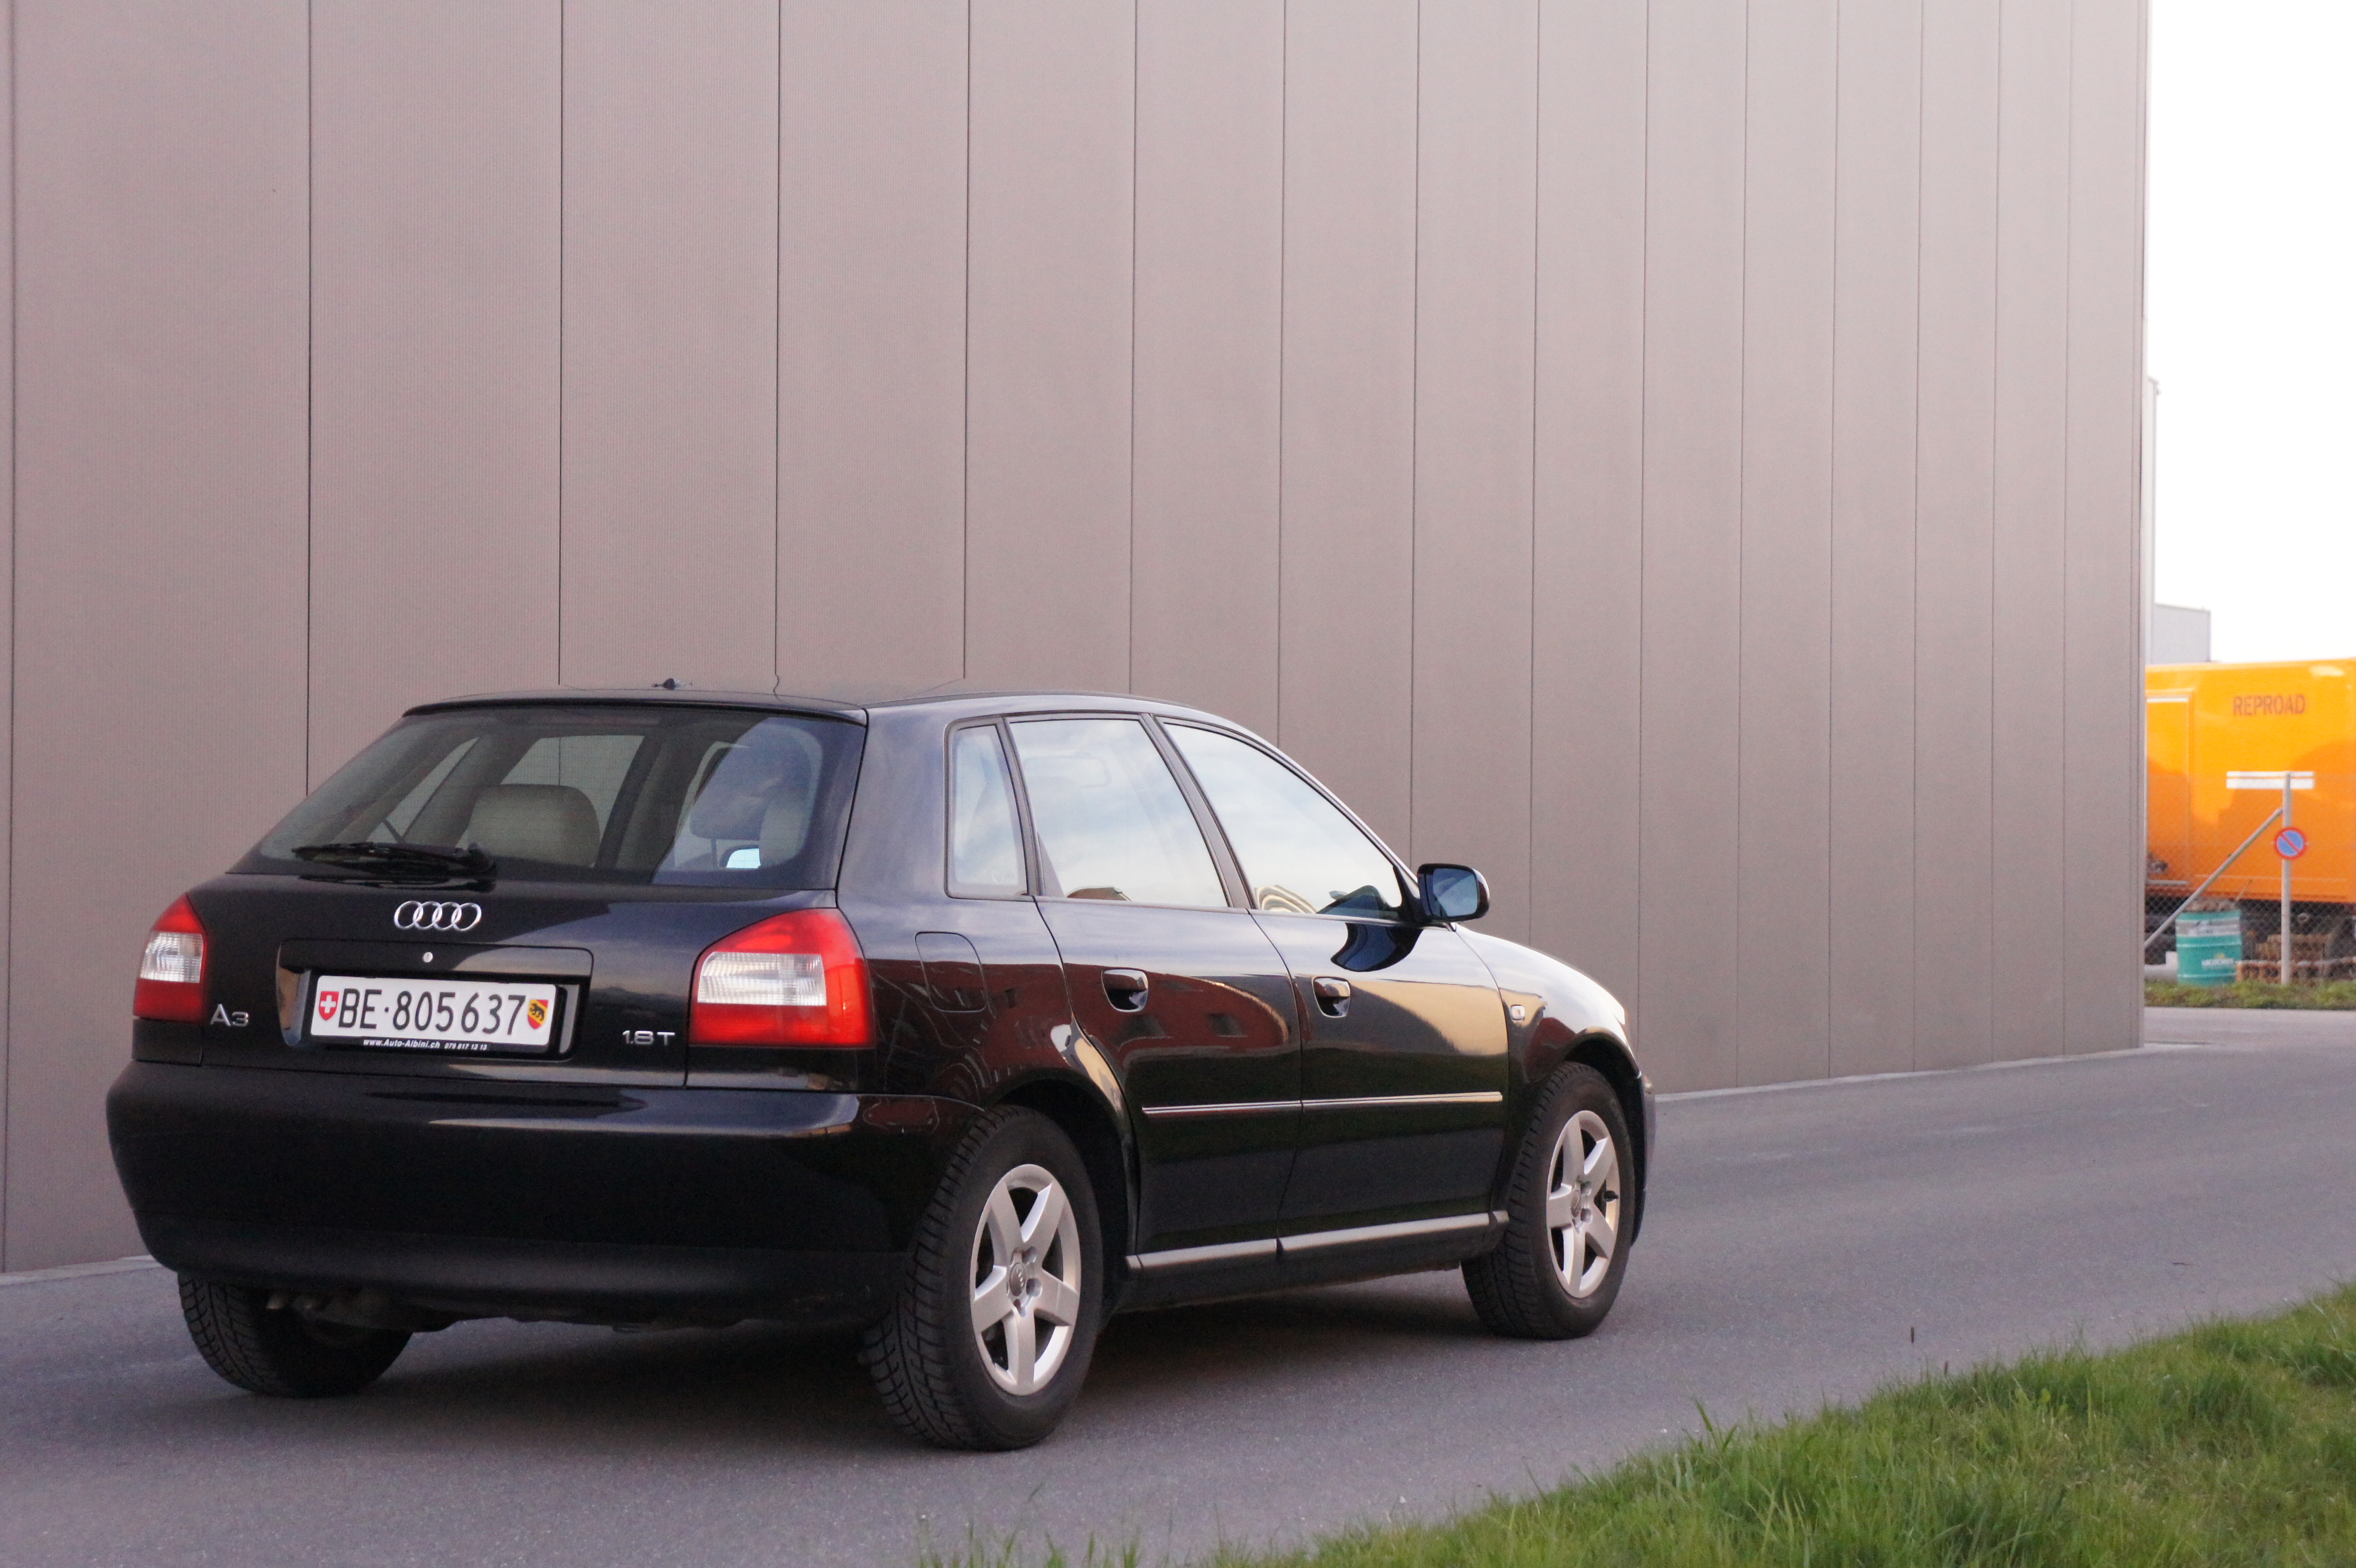 File:Rear View of an Audi A3.JPG - Wikimedia Commons